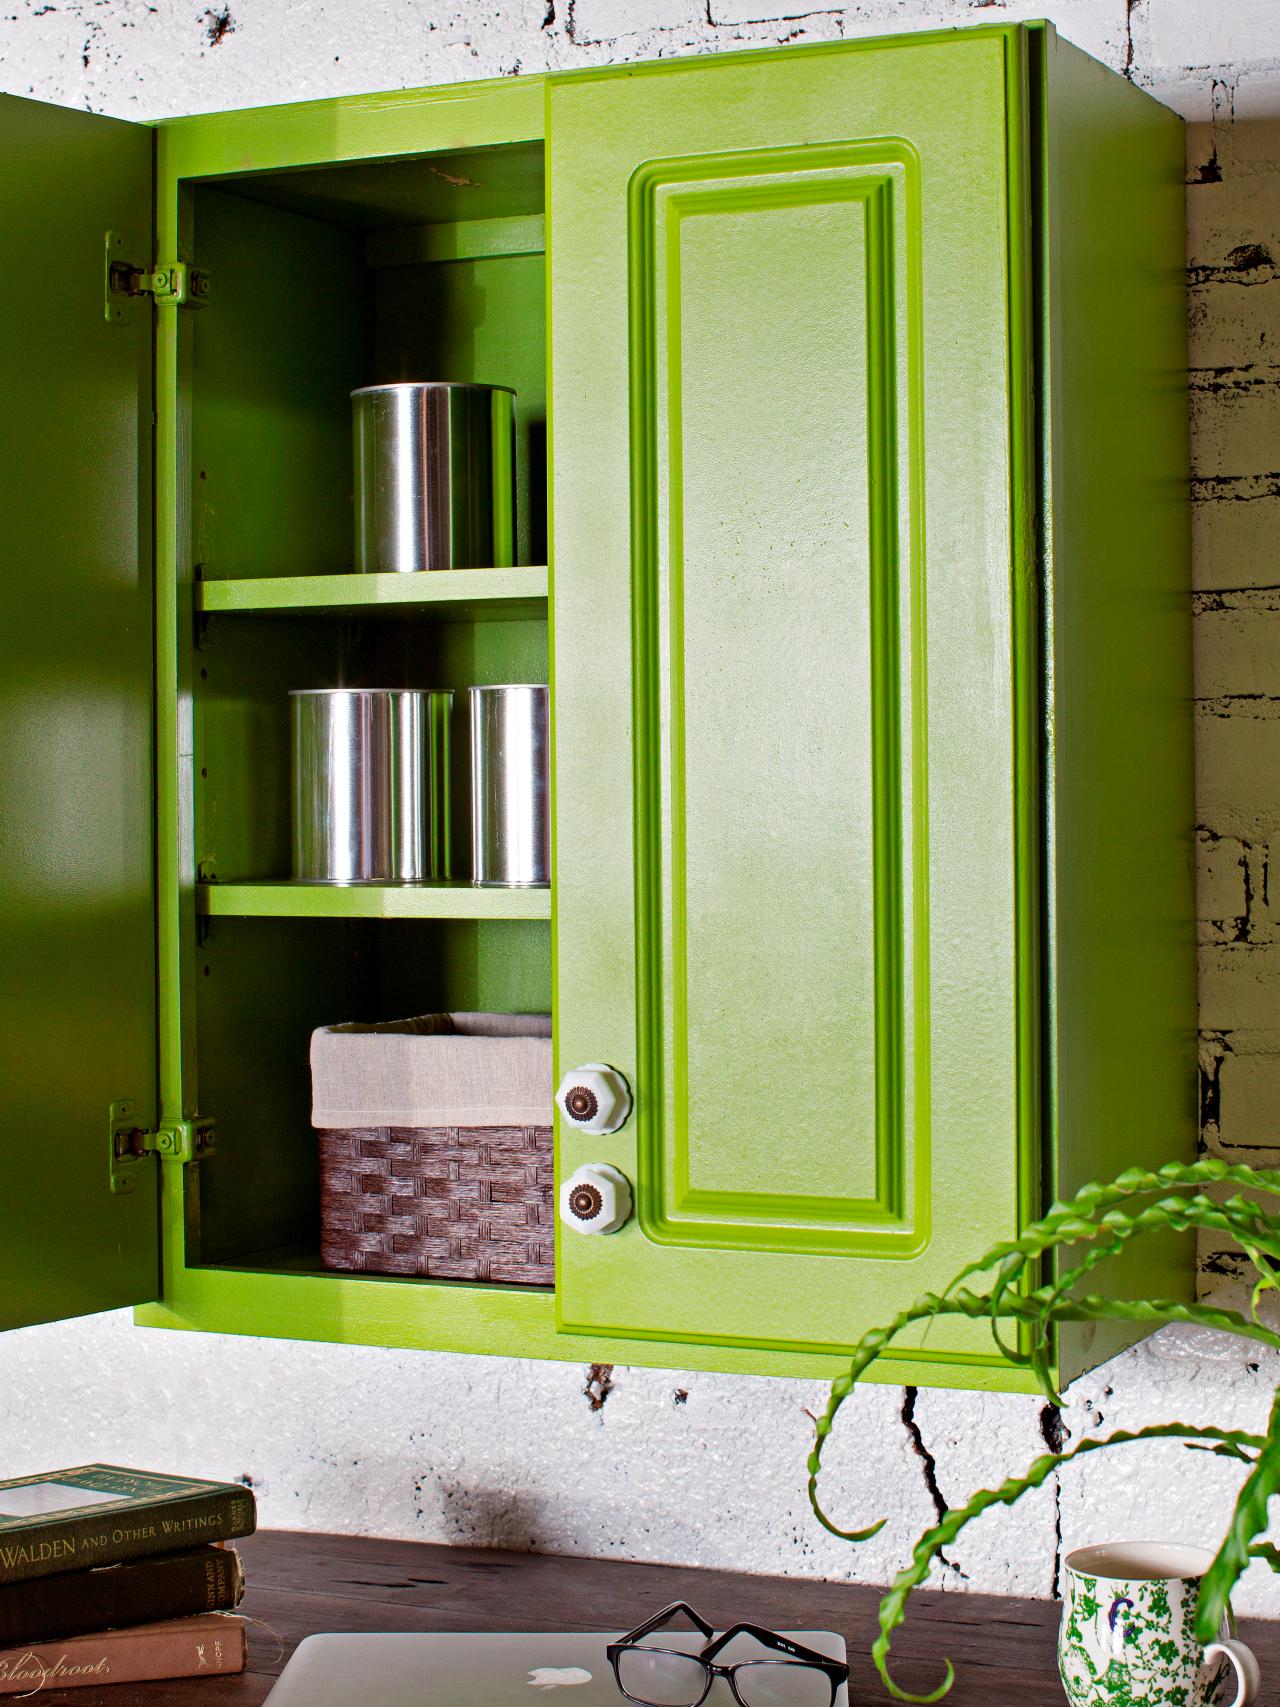 How To Spray Paint Kitchen Cabinets